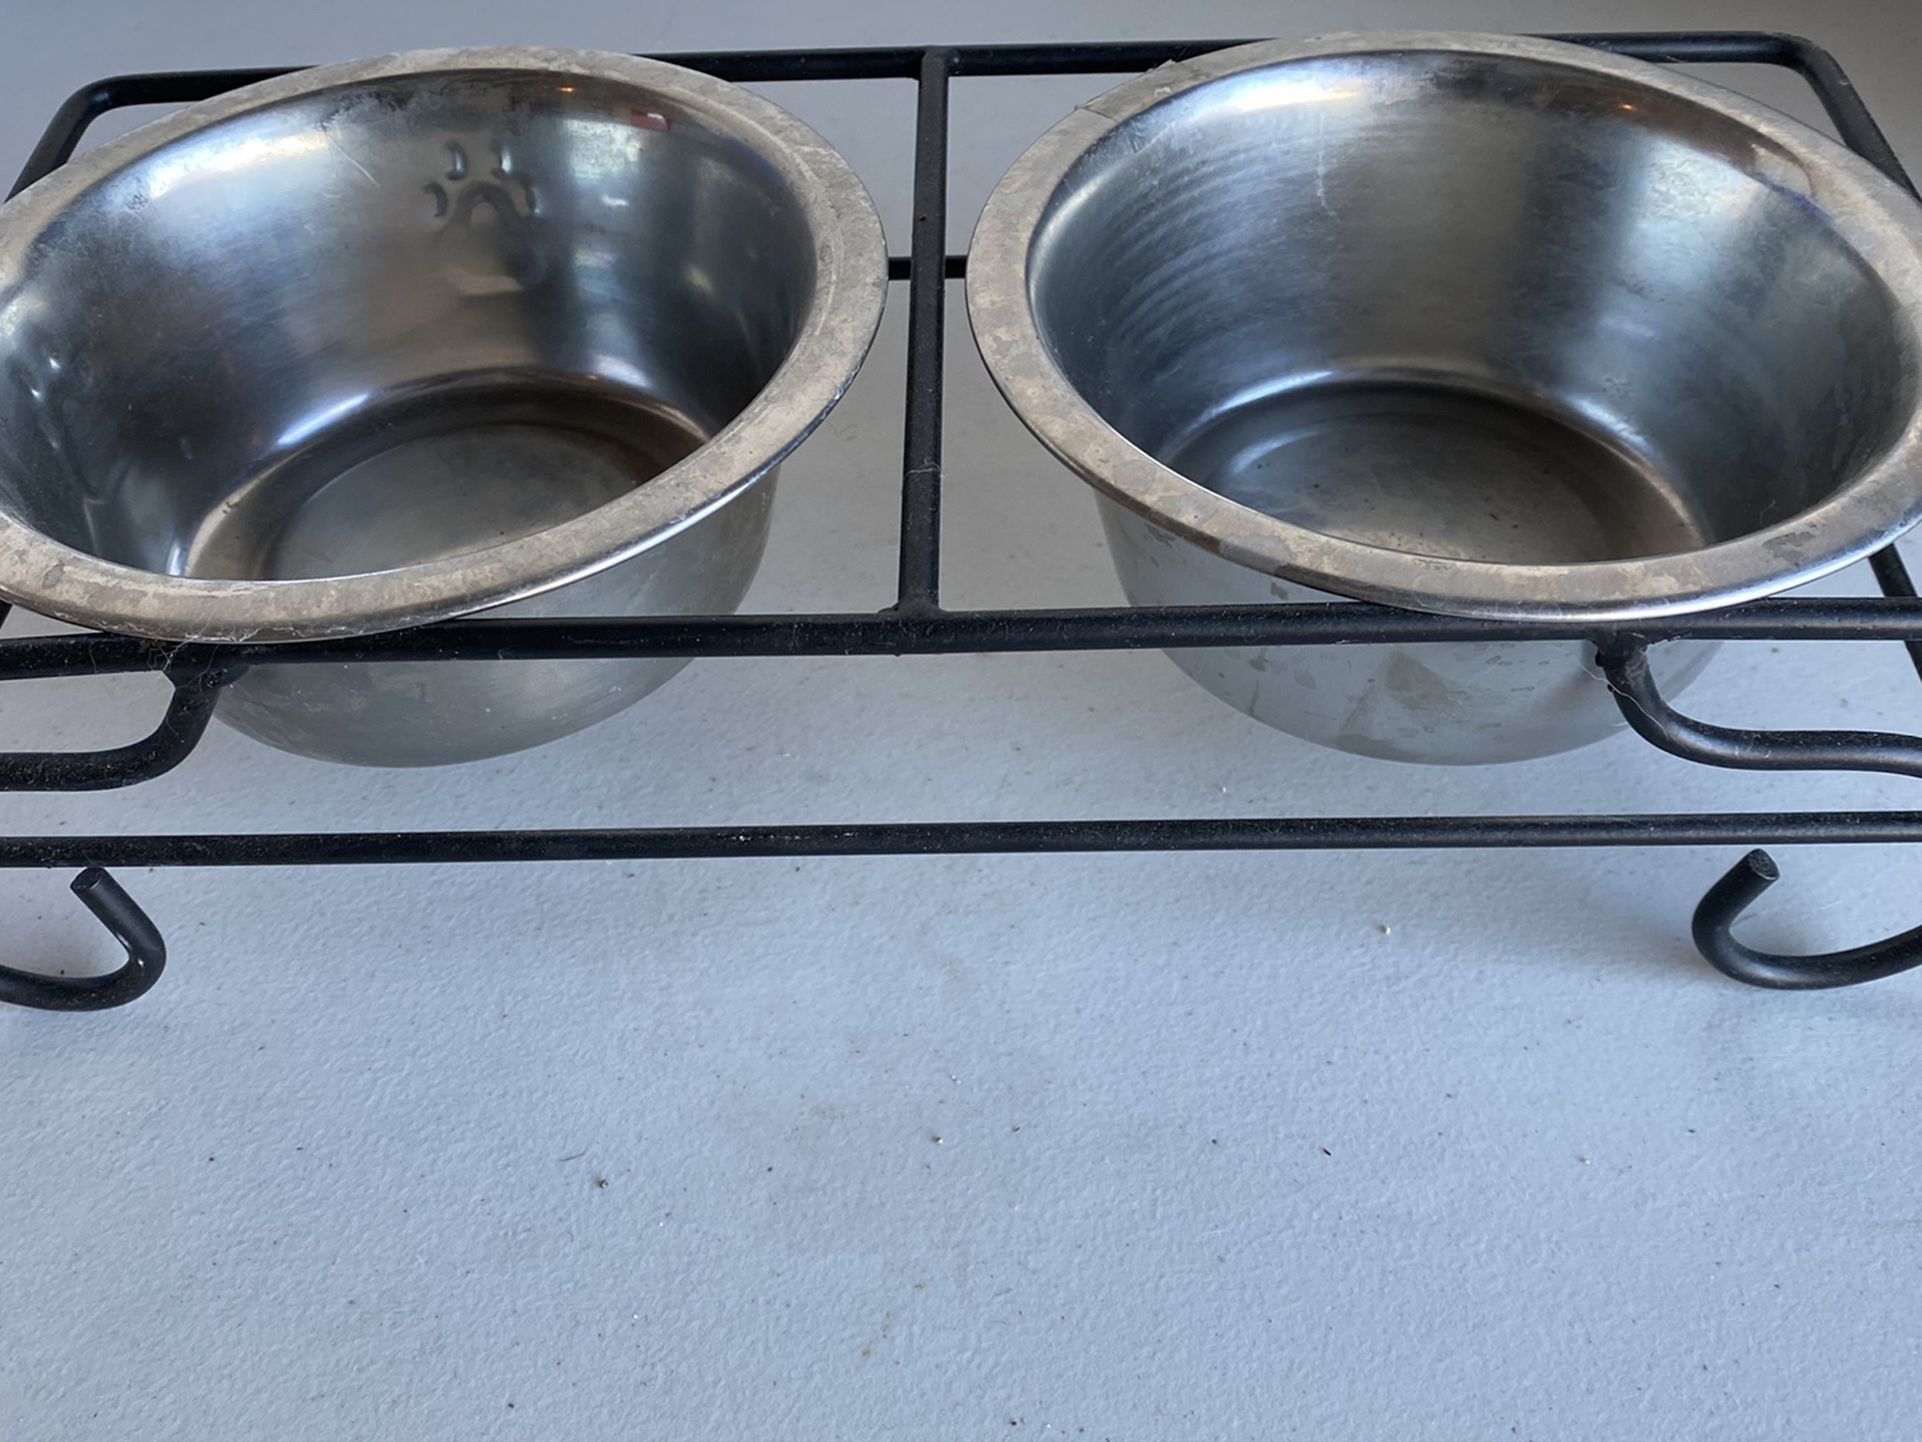 Pet Food Dishes and Holder